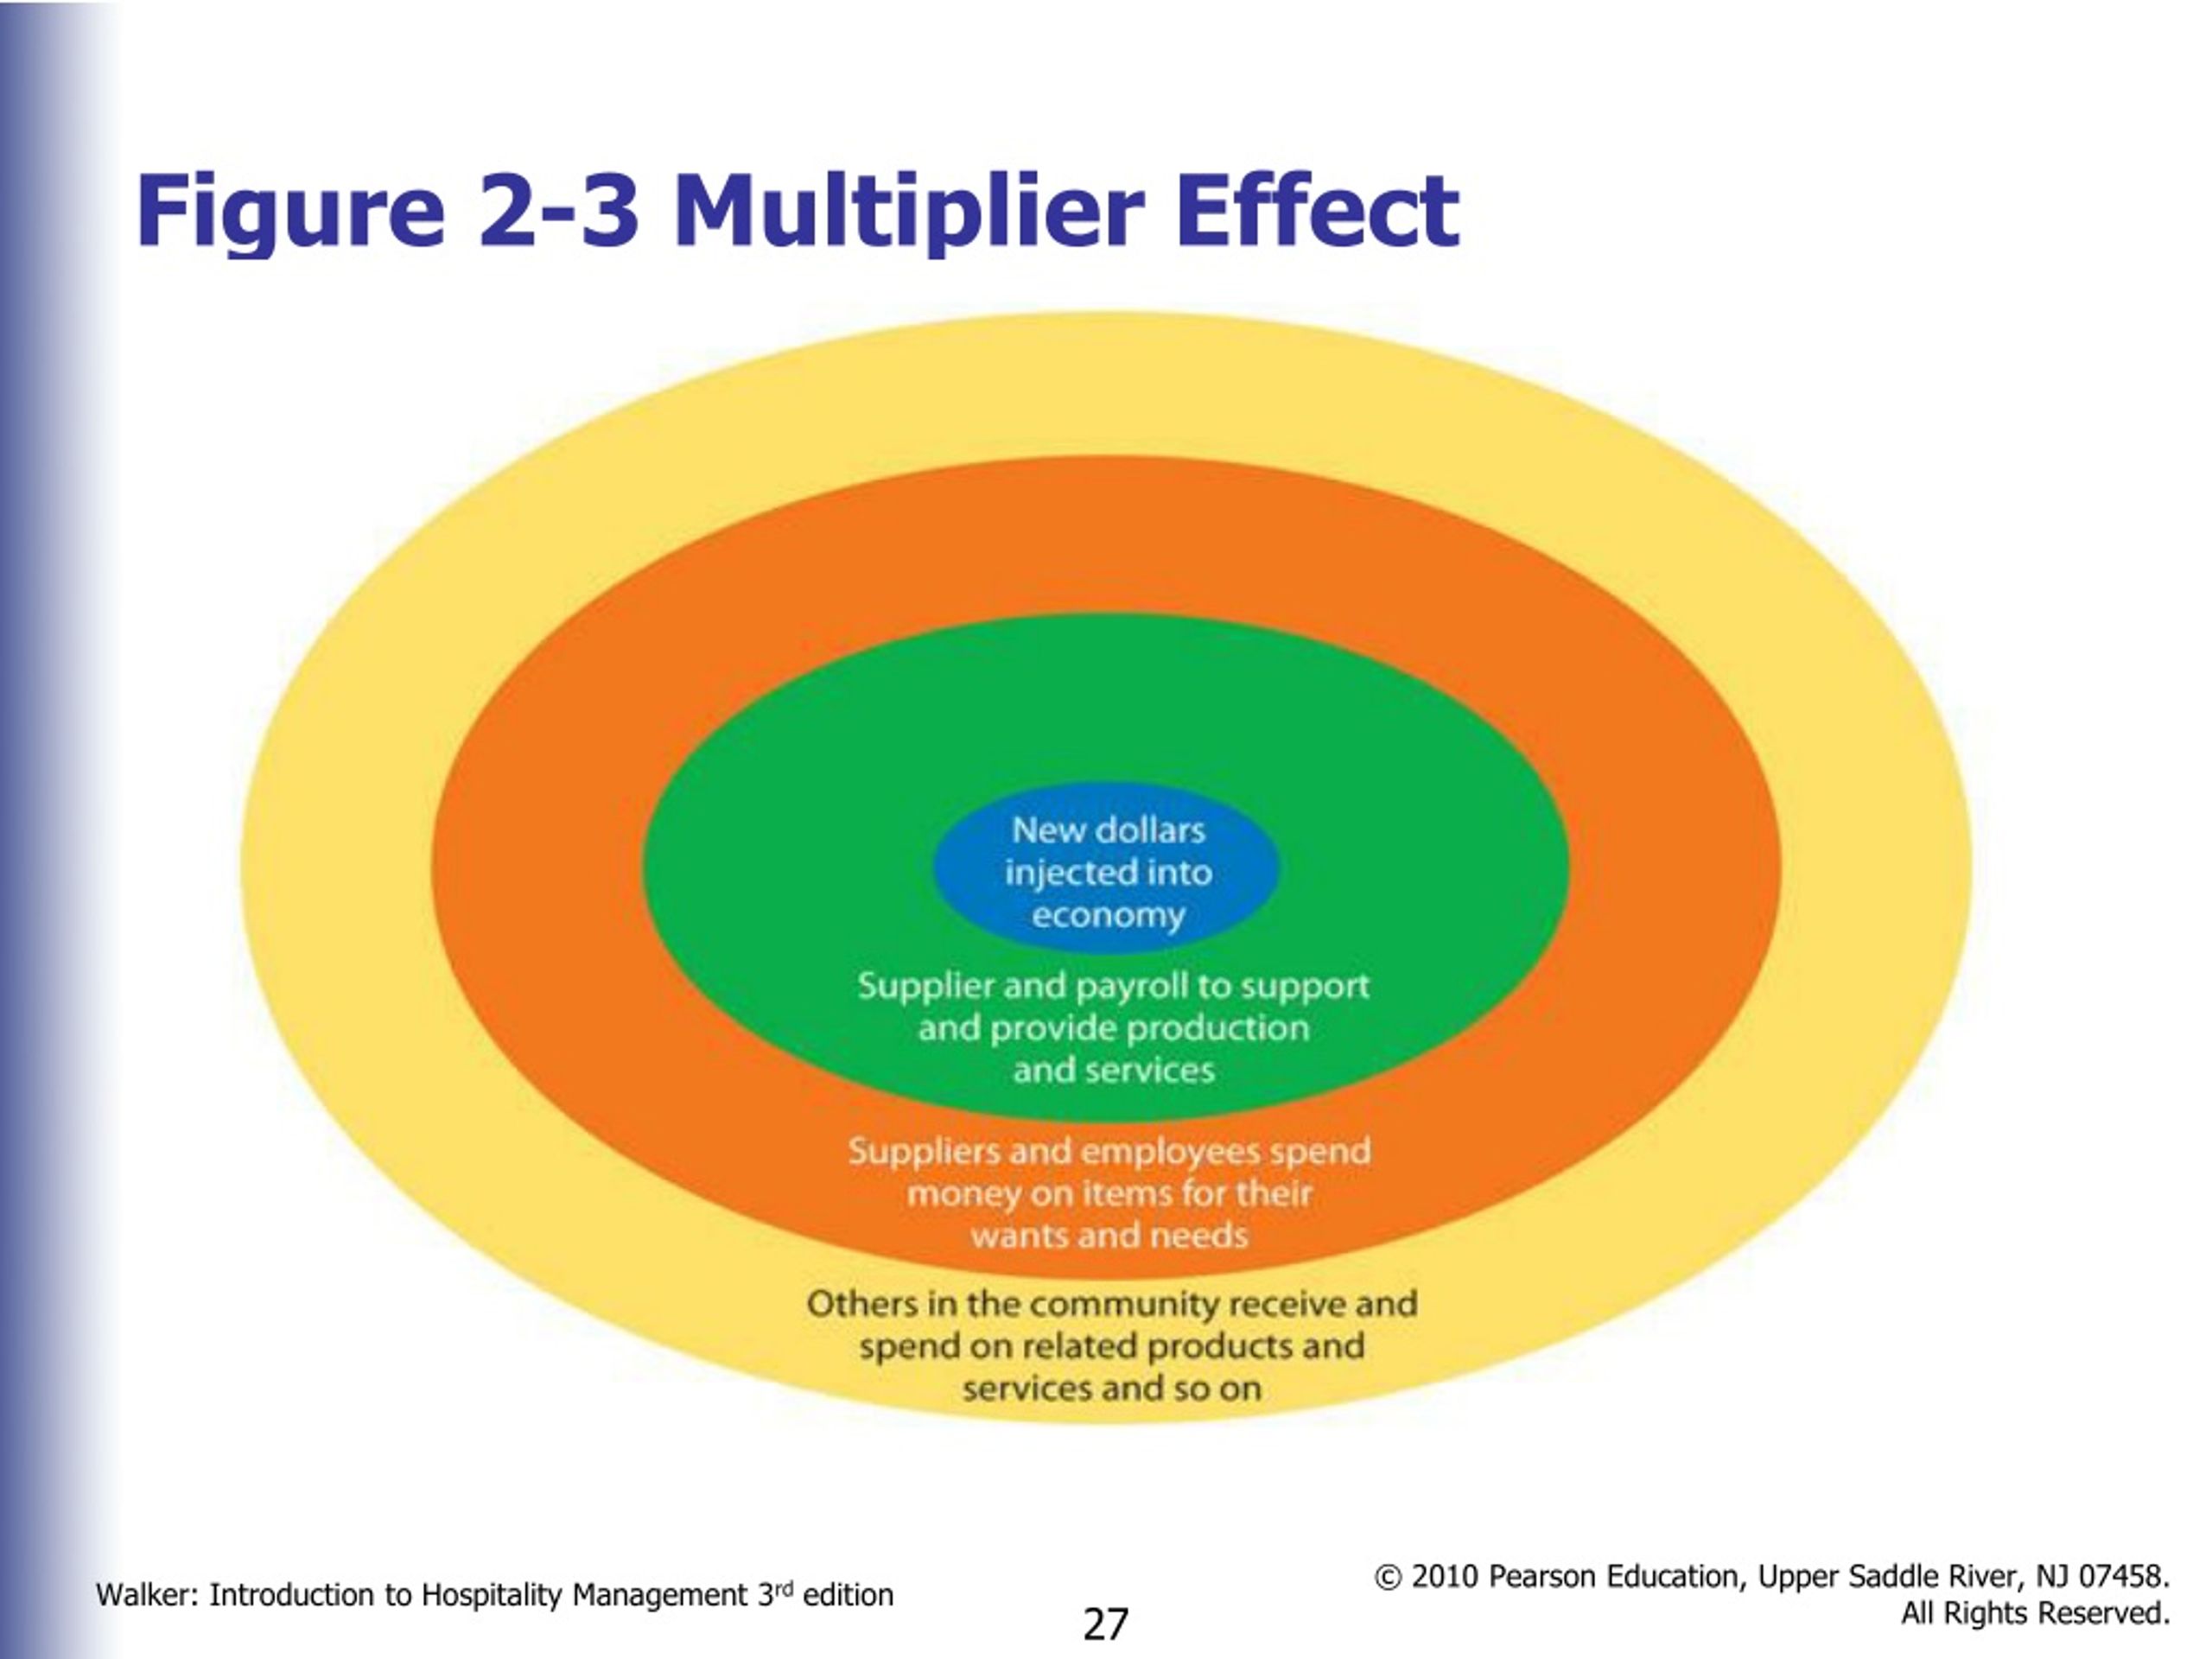 what multiplier effect tourism